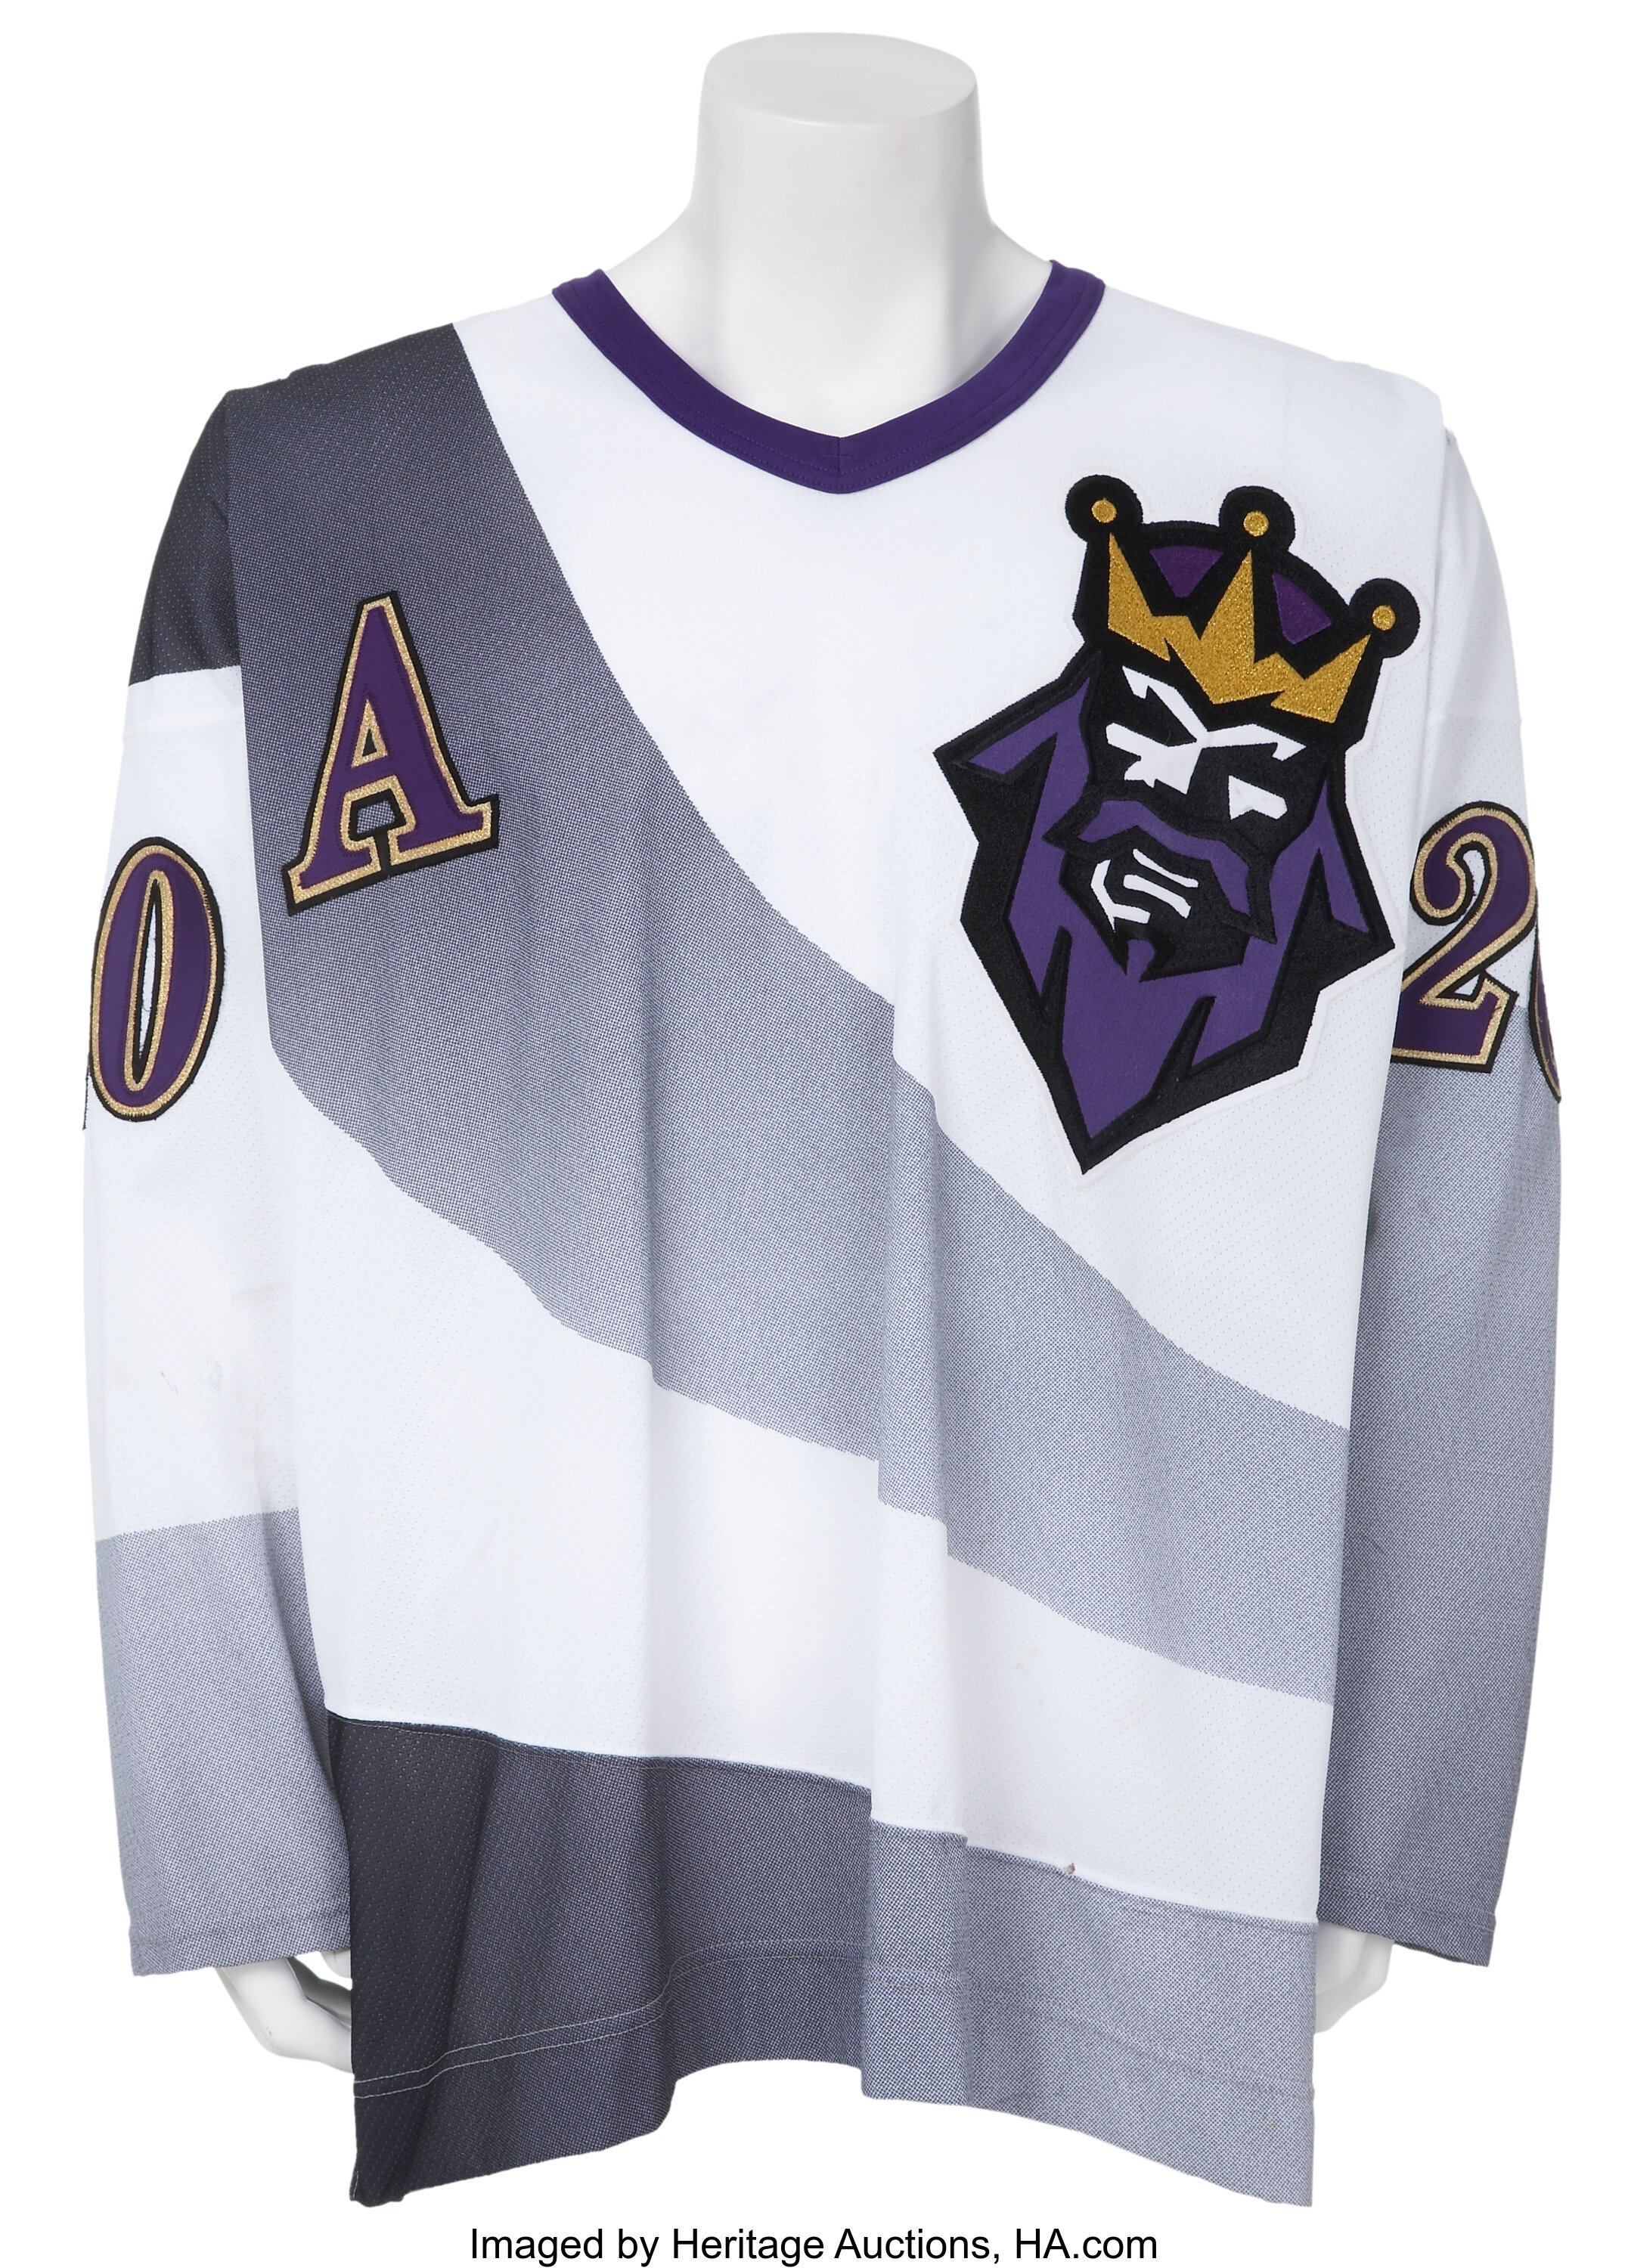 The Worst NHL Jerseys Of All Time: The Burger King, The Barber